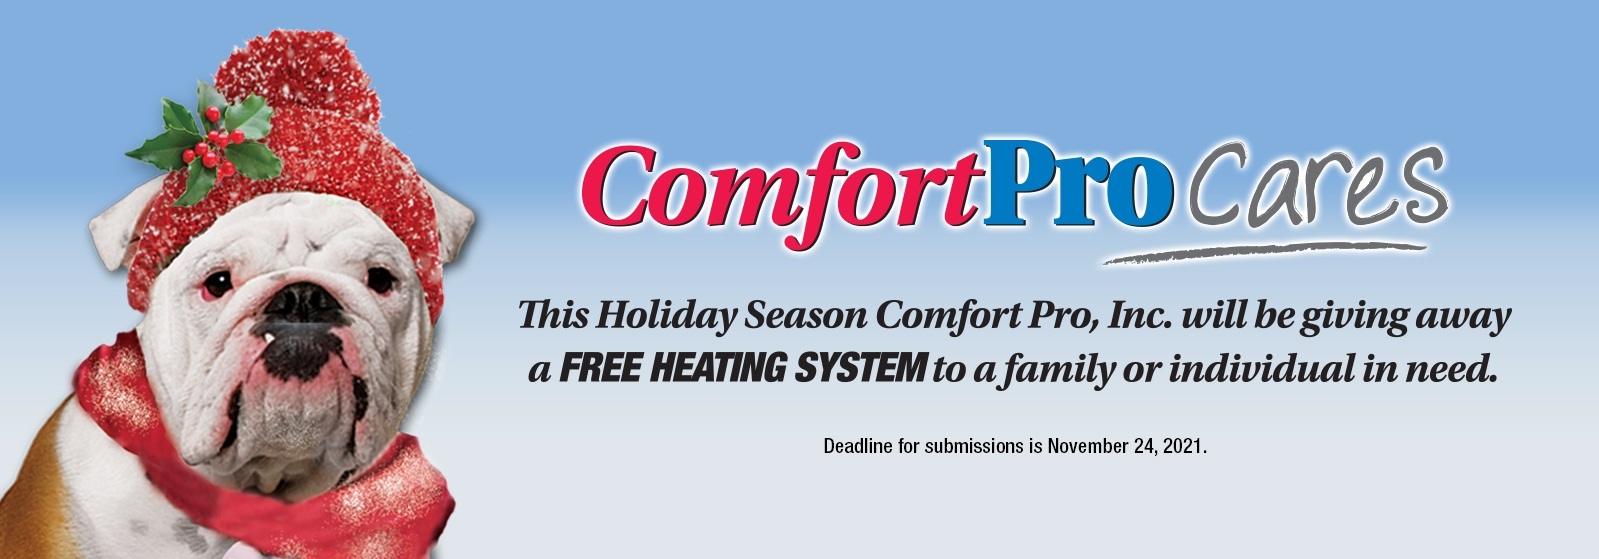 Comfort Pro Cares in Reading, PA